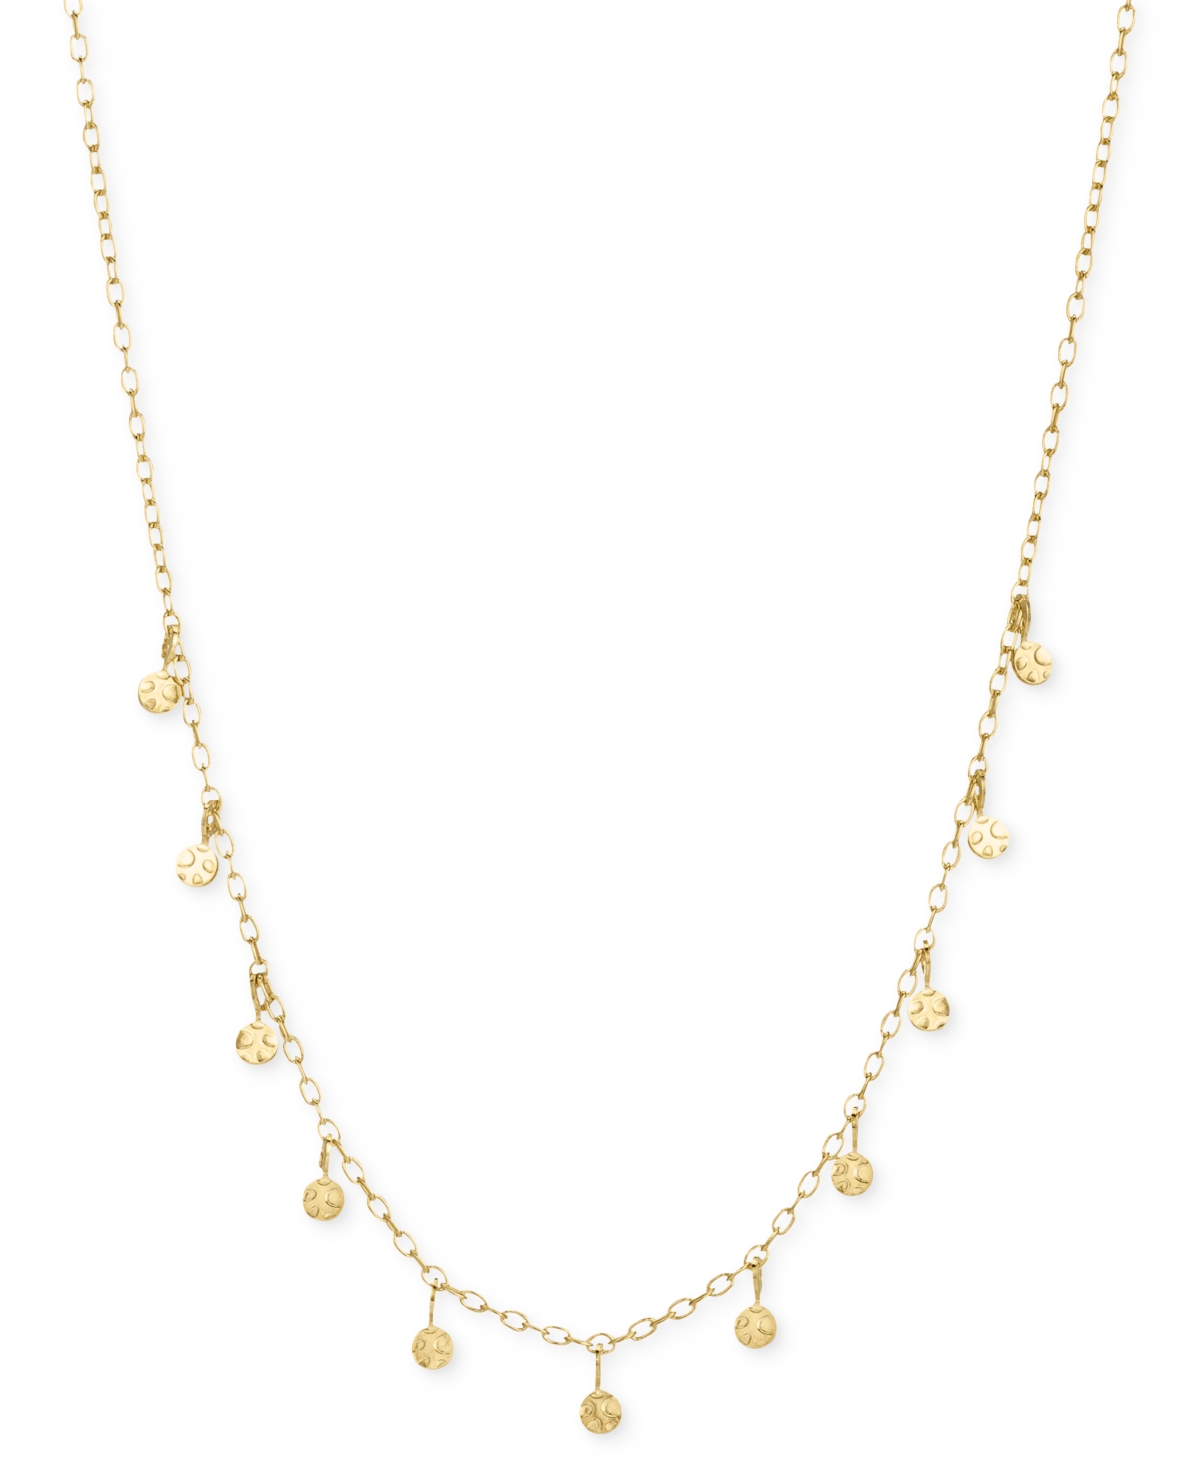 Dangle Disc Choker Necklace in 14k Gold-Plated Sterling Silver, 12" + 2" extender - Gold Plated